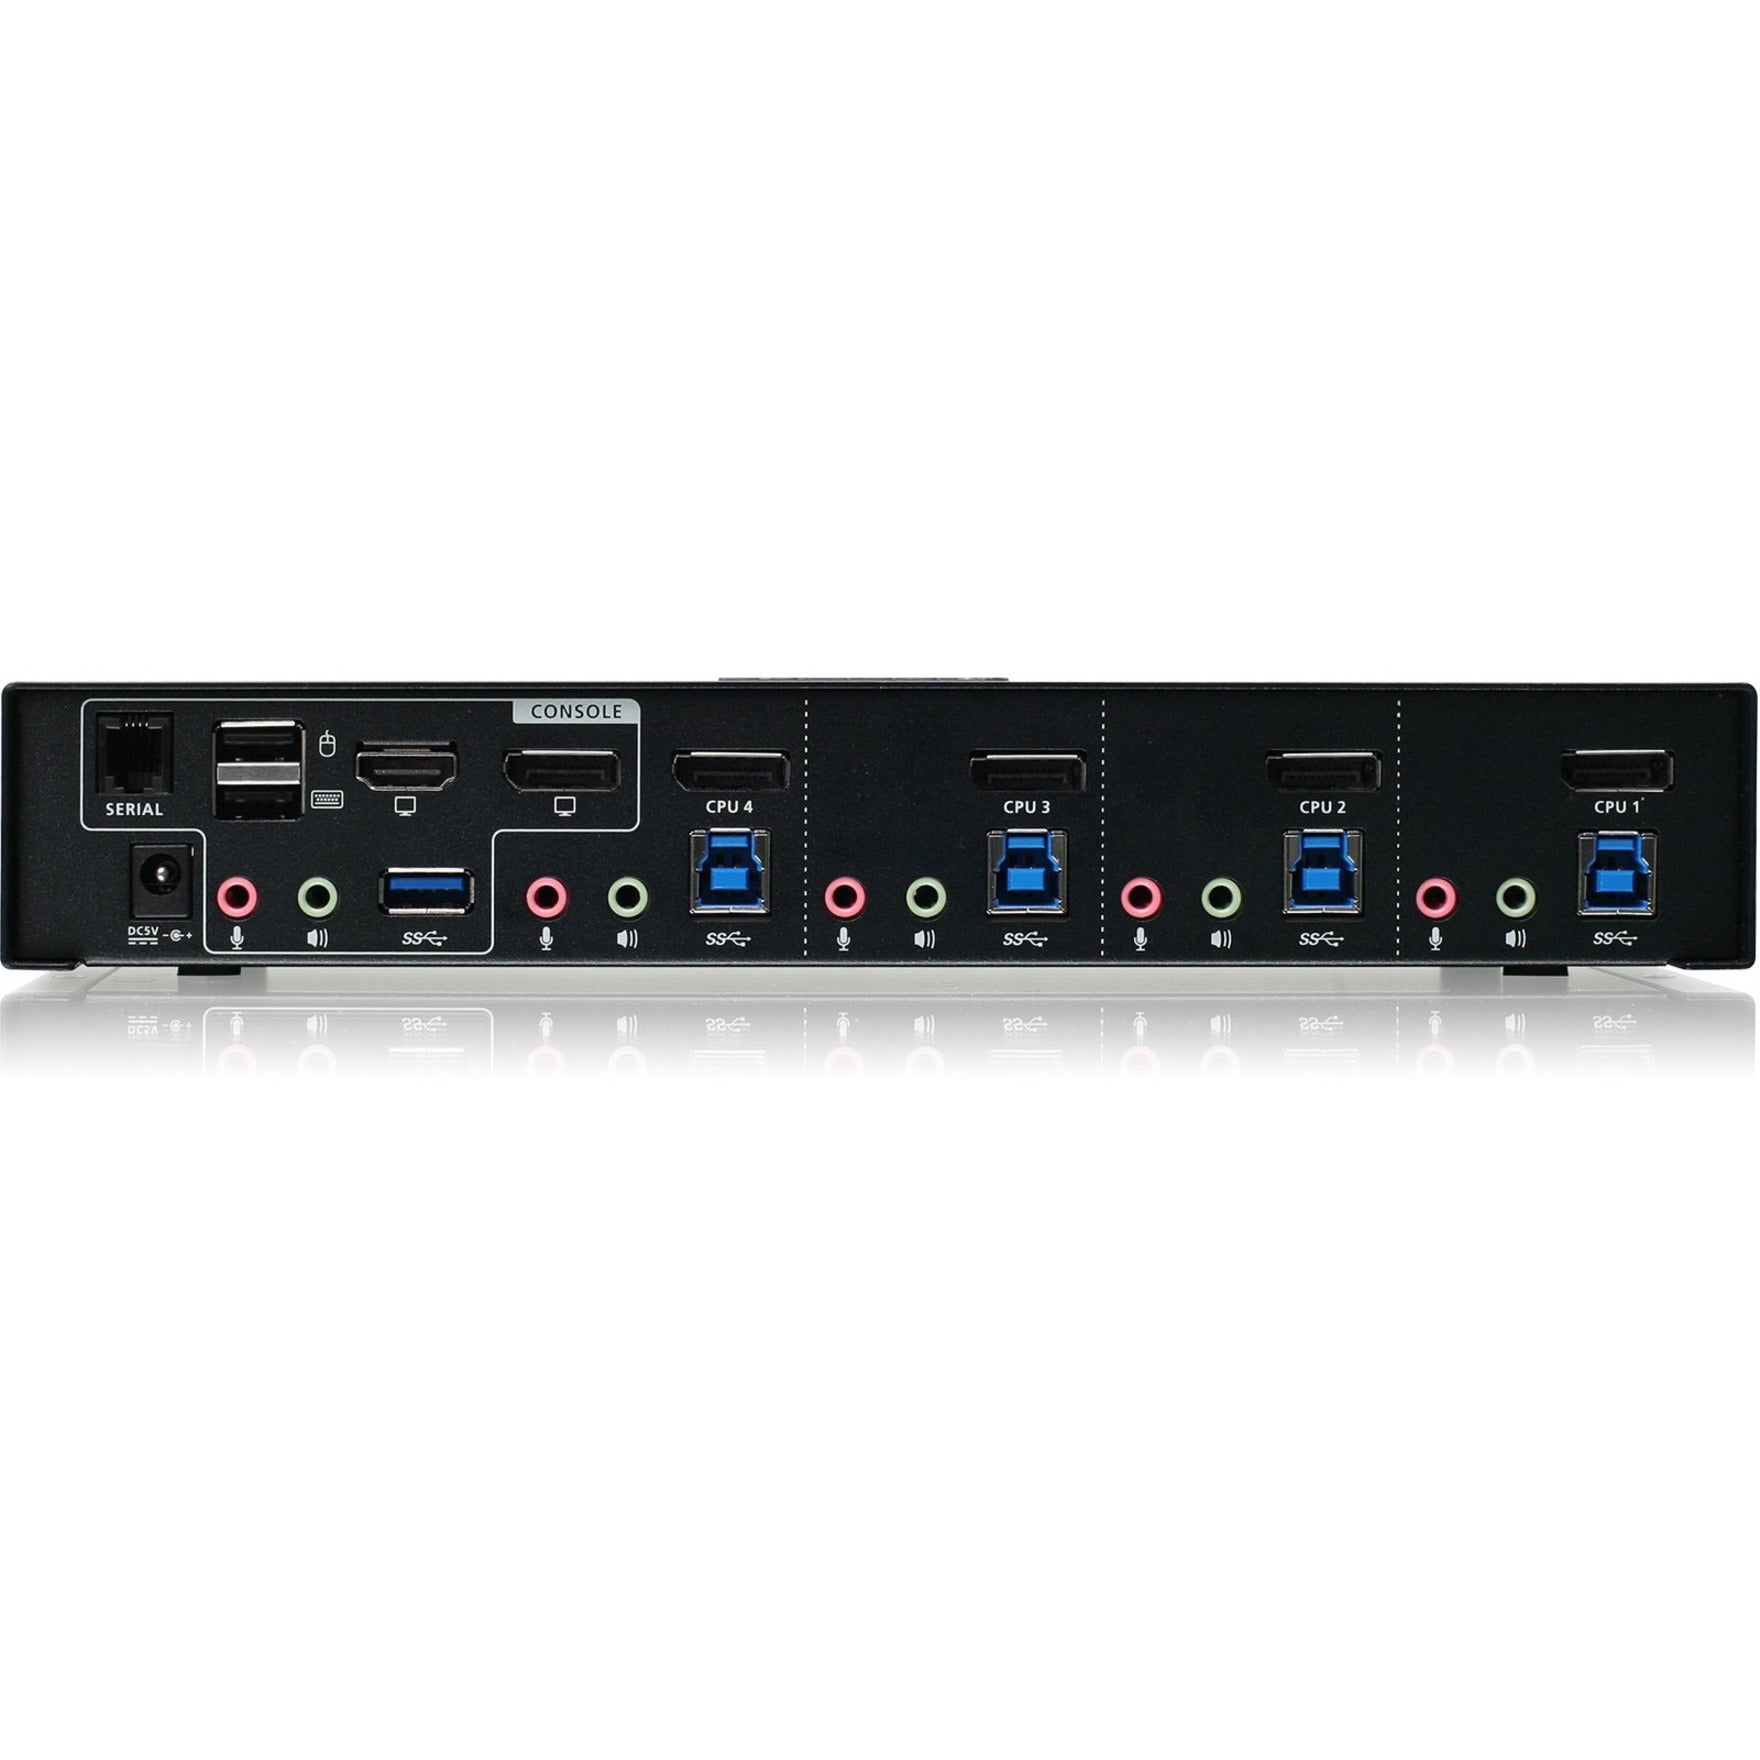 IOGEAR GCS1934M 4-Port 4K DisplayPort KVMP Switch with Dual Video Out and RS-232, Maximum Video Resolution 4096 x 2160, 3 Year Warranty